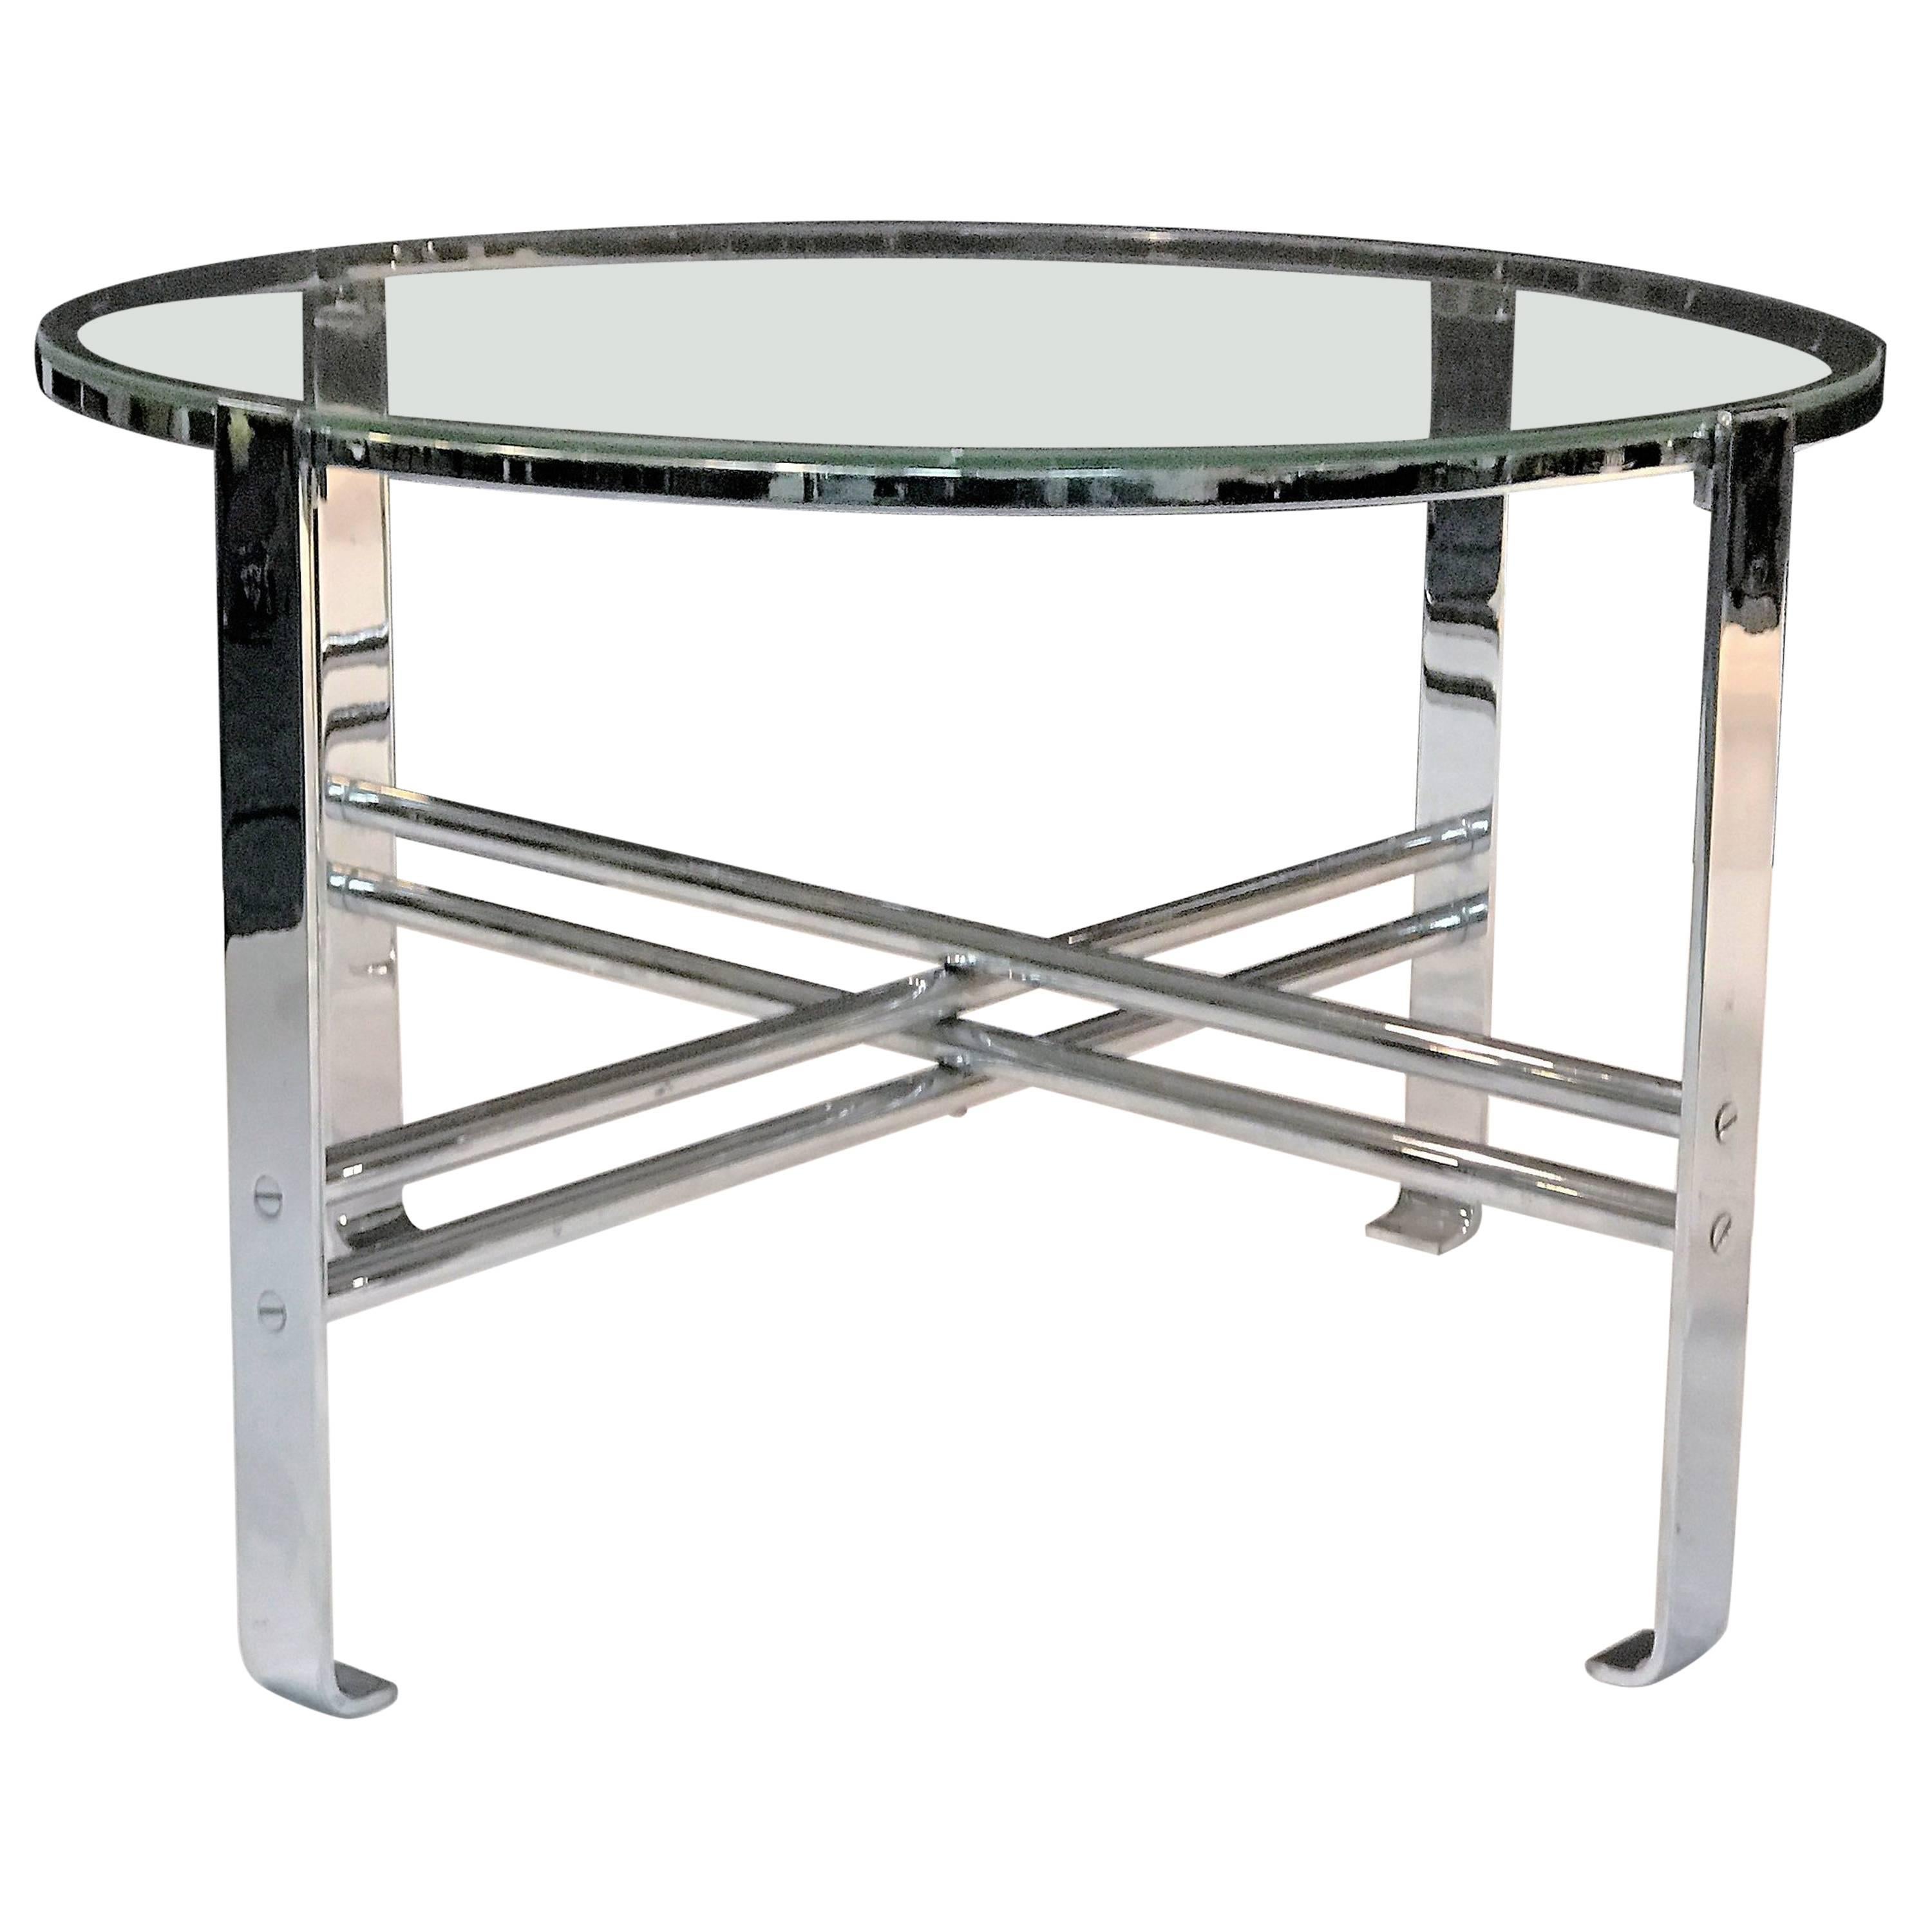 Rare Modernist Art Deco Table by Wolfgang Hoffman For Sale